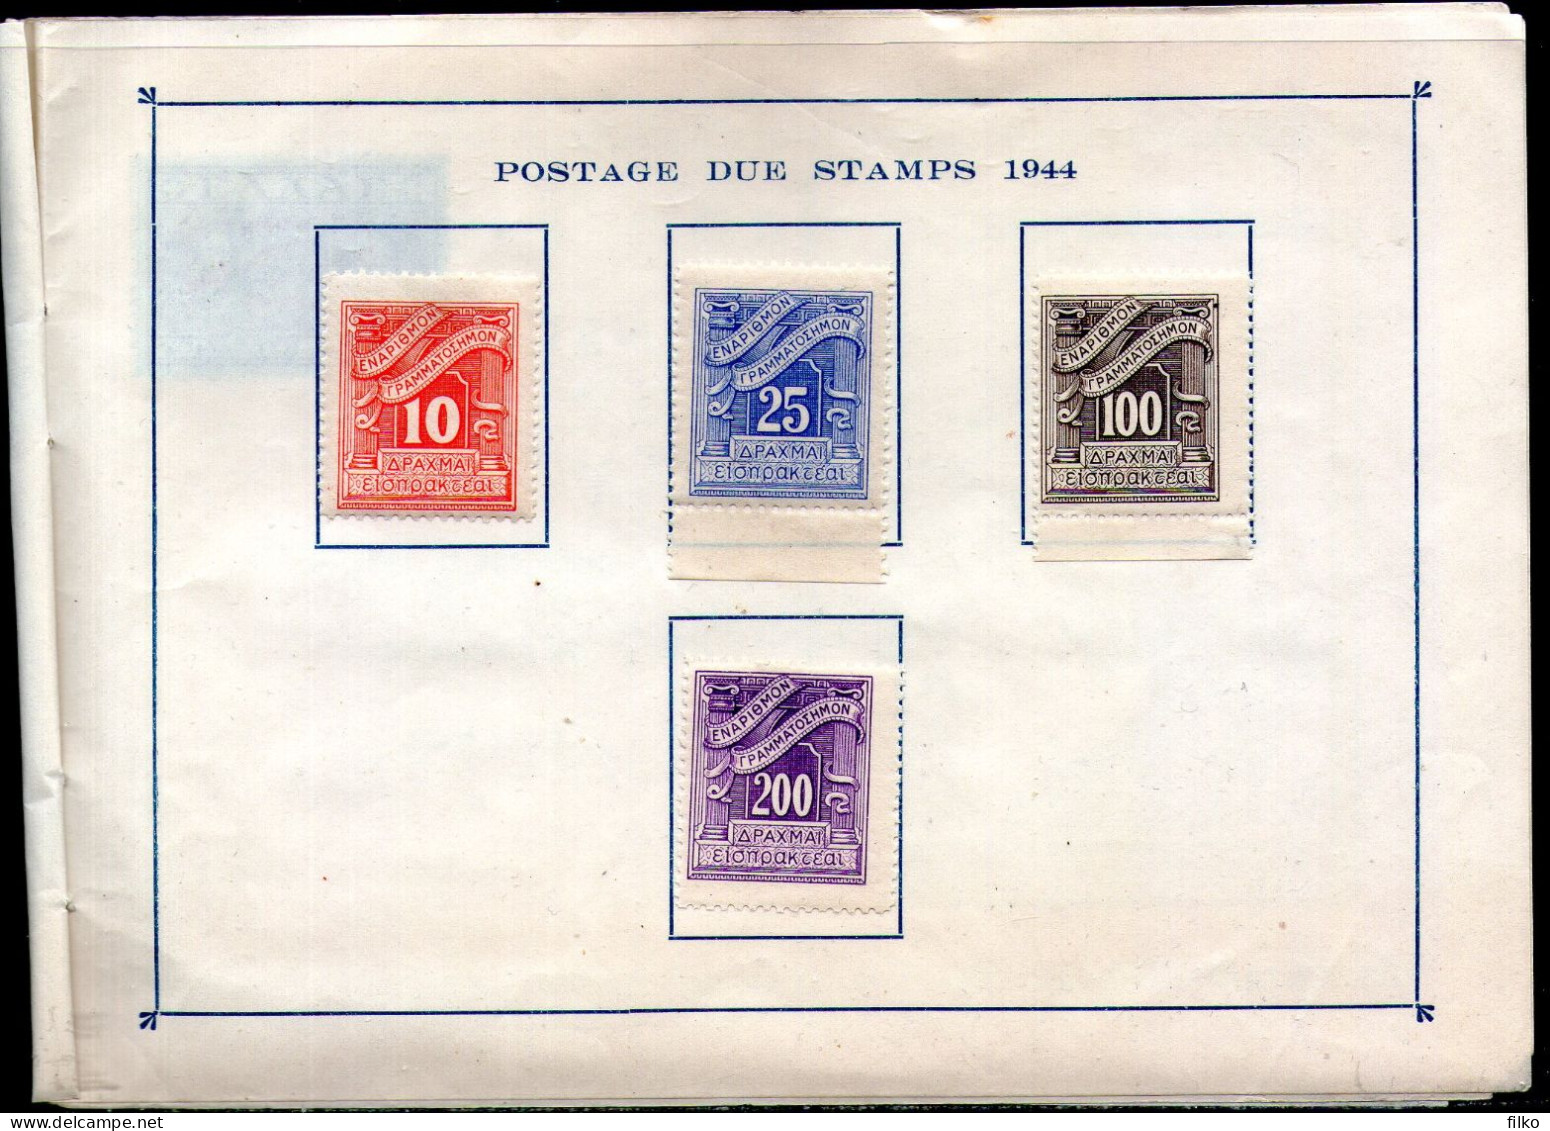 Greece,Book for stamps issued during the WWII period MLH * ,,as scan